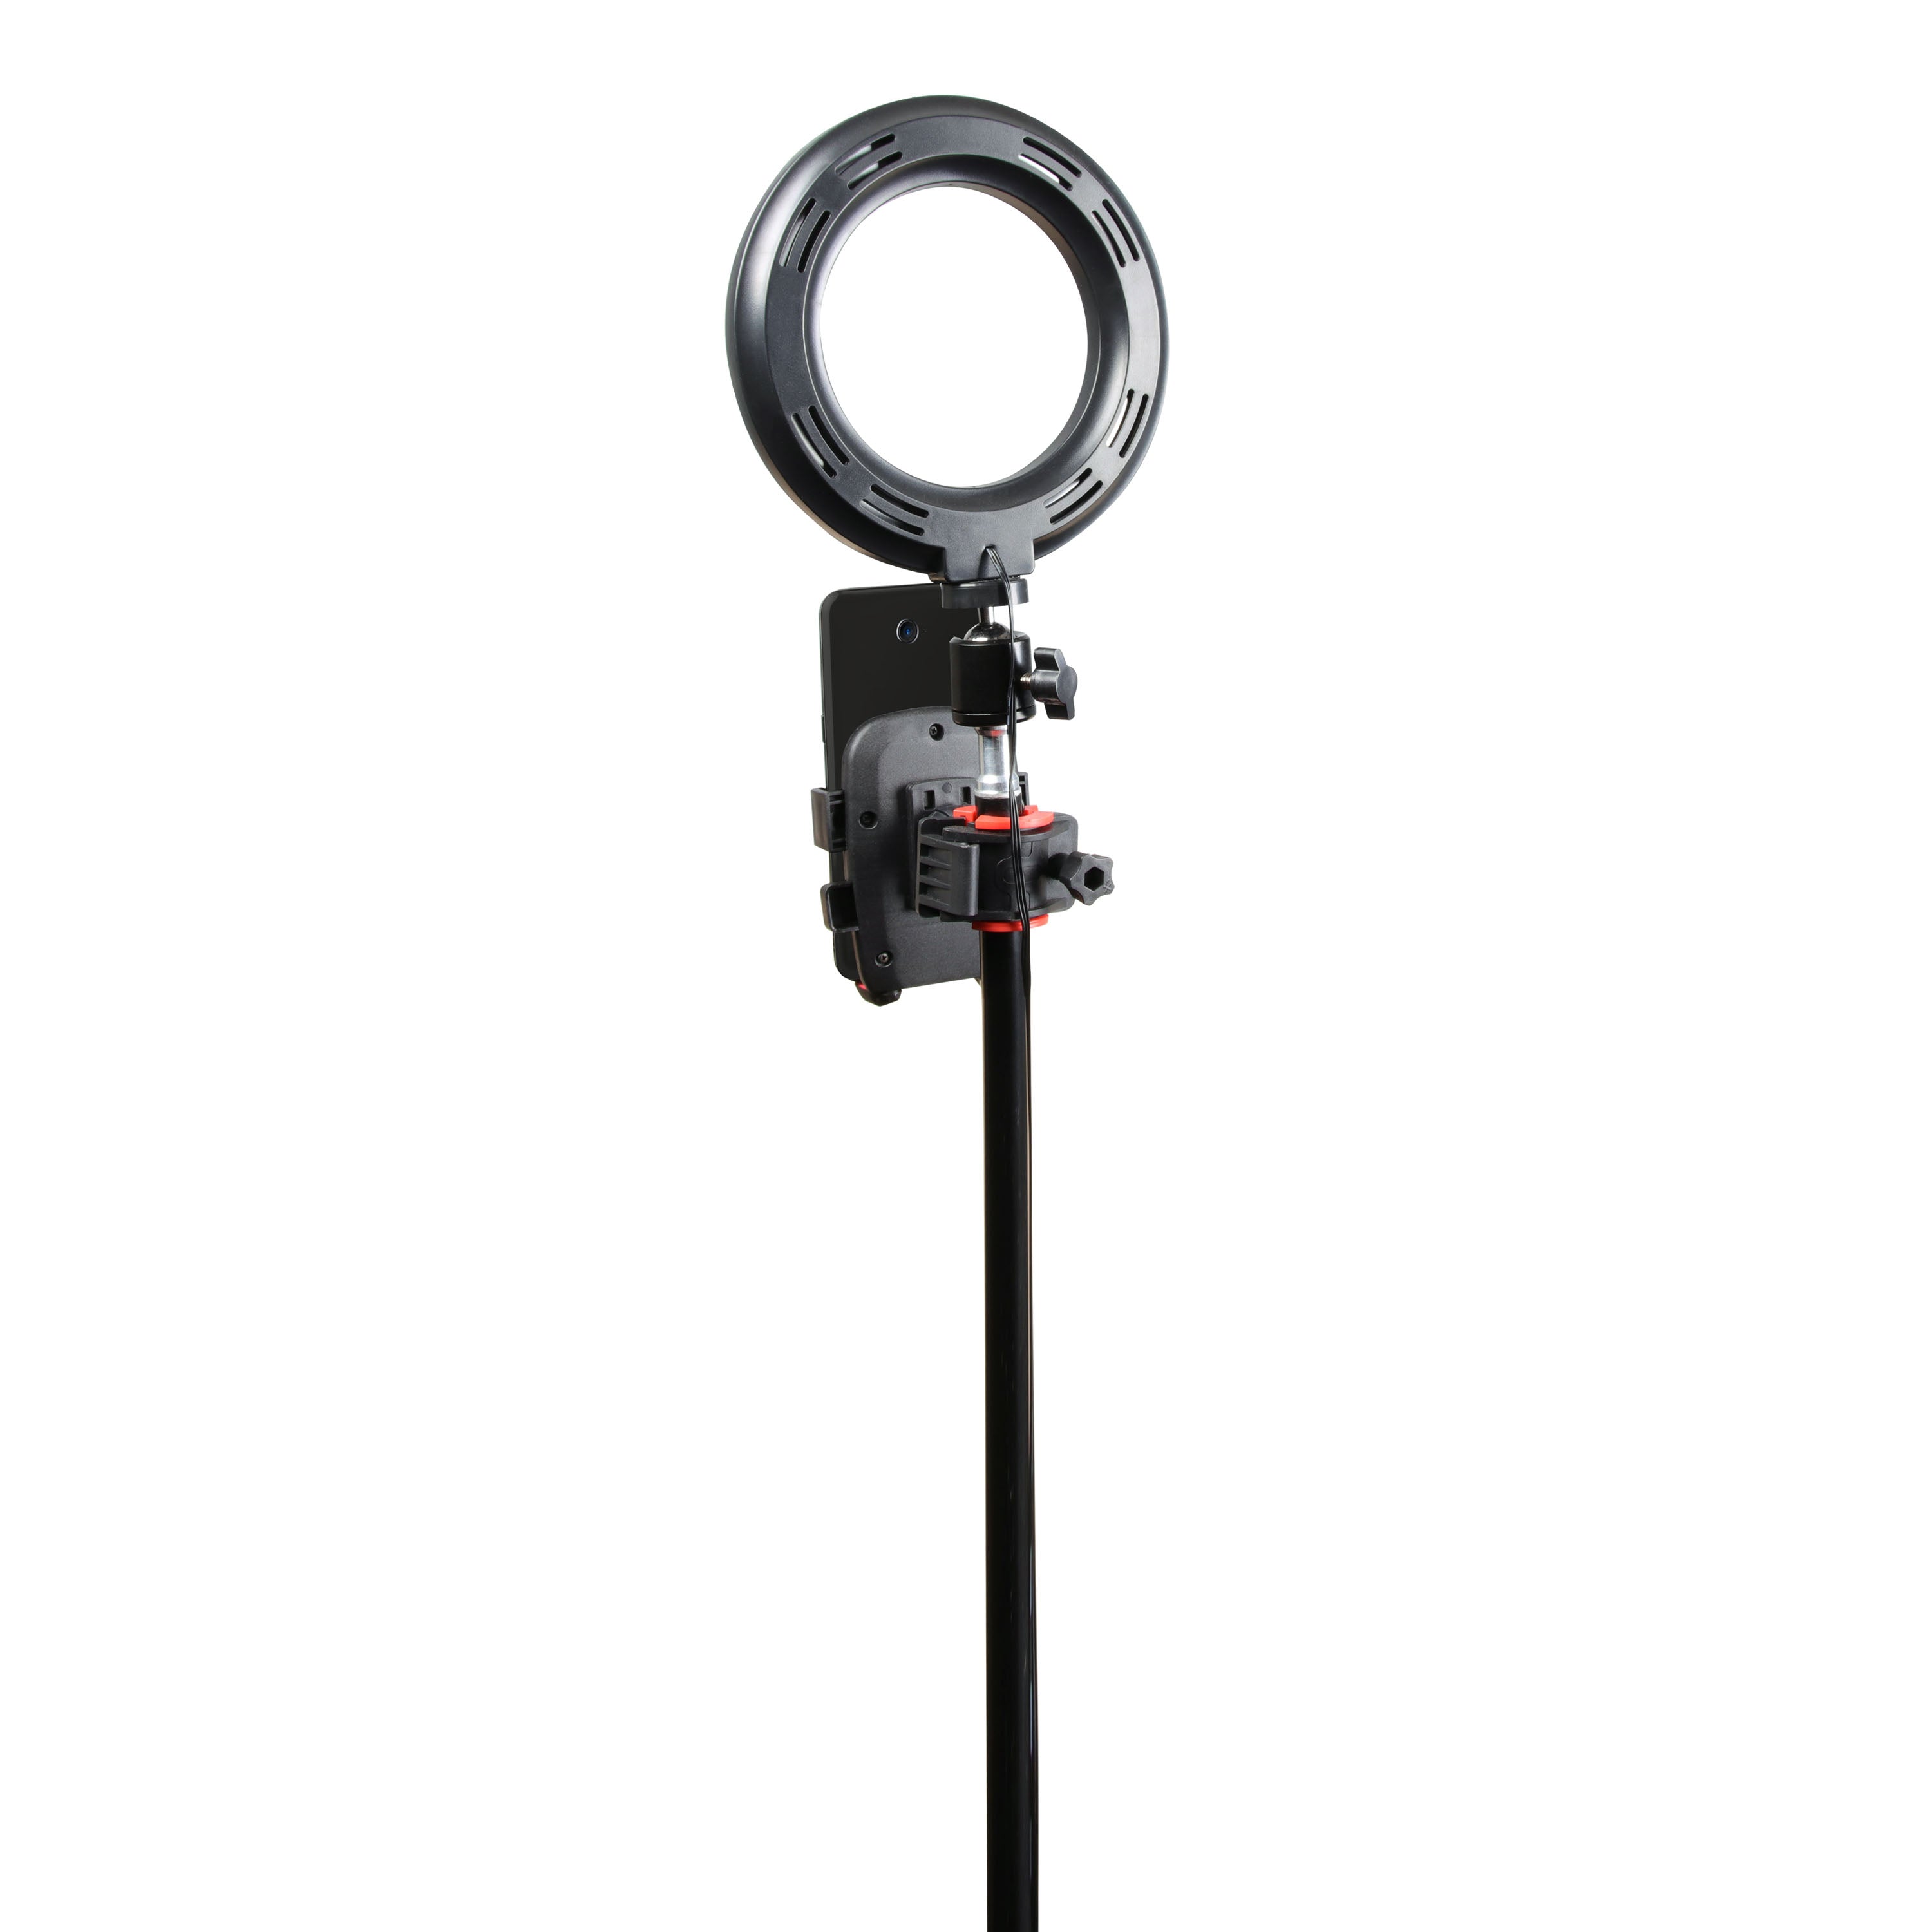 6 Inch Ring Light Tripod Kit with Light, Tripod and Phone Mount